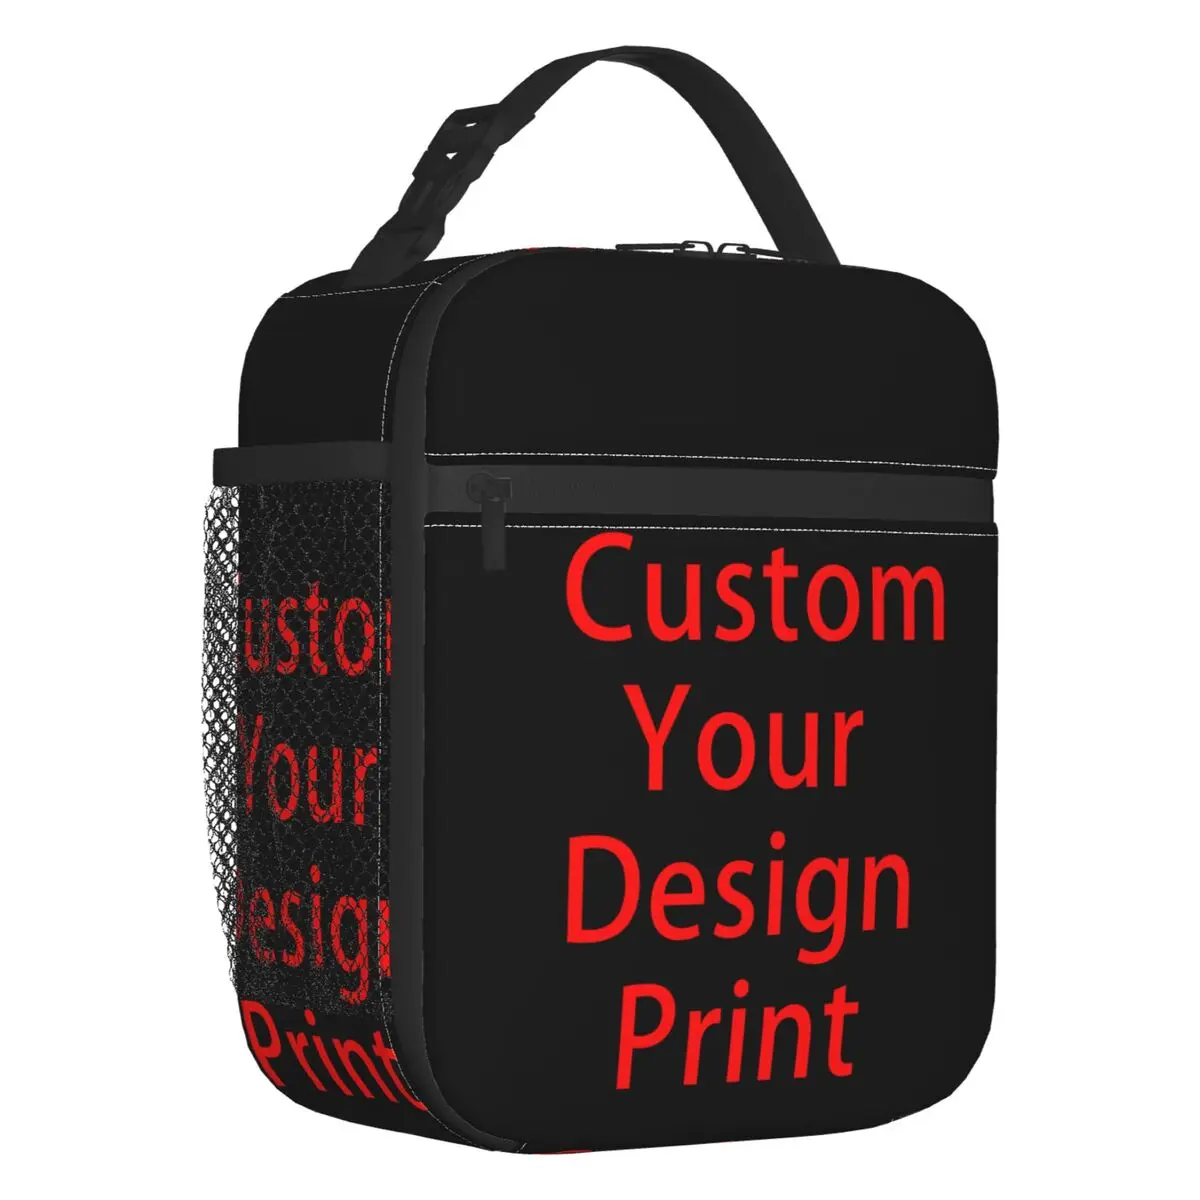 Custom Your Design Portable Lunch Box Women Customized Logo Printed Thermal Cooler Food Insulated Lunch Bag School Children DIY